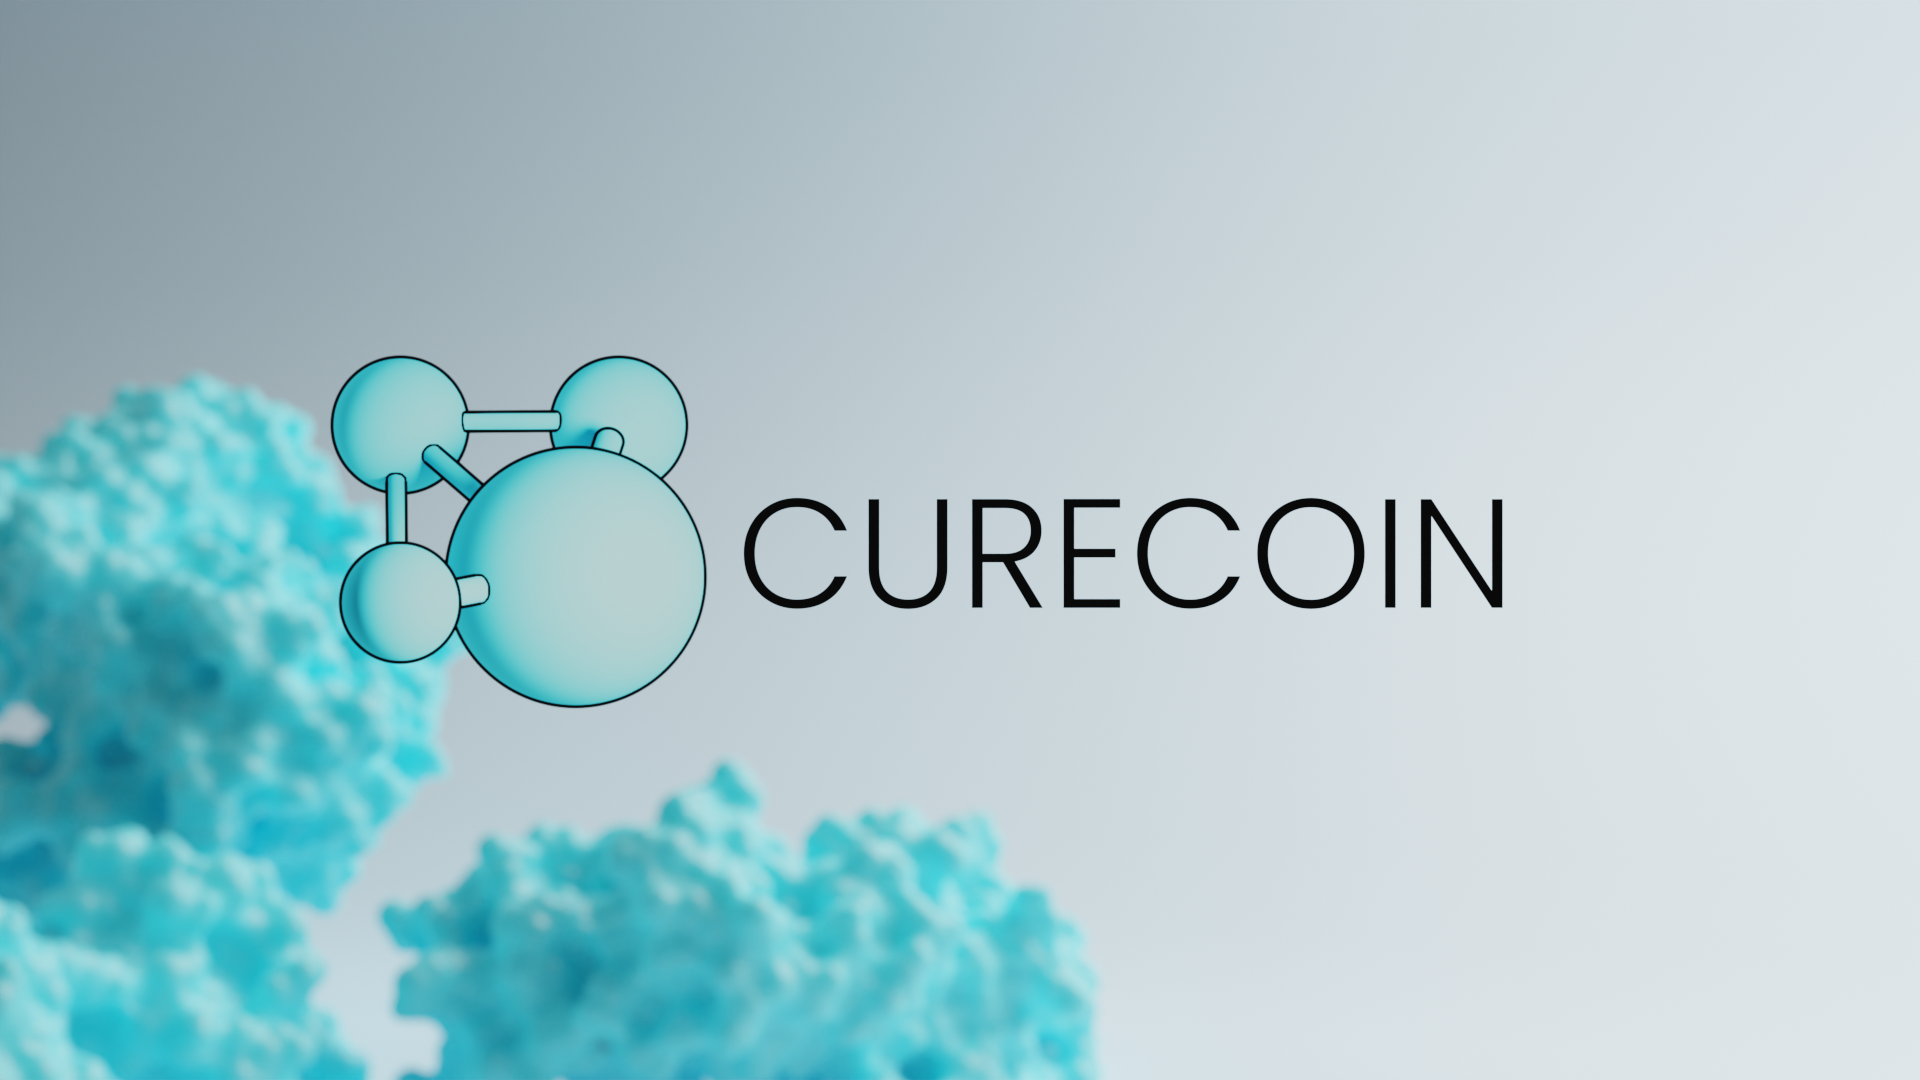 Curecoin Price Today - CURE to US dollar Live - Crypto | Coinranking